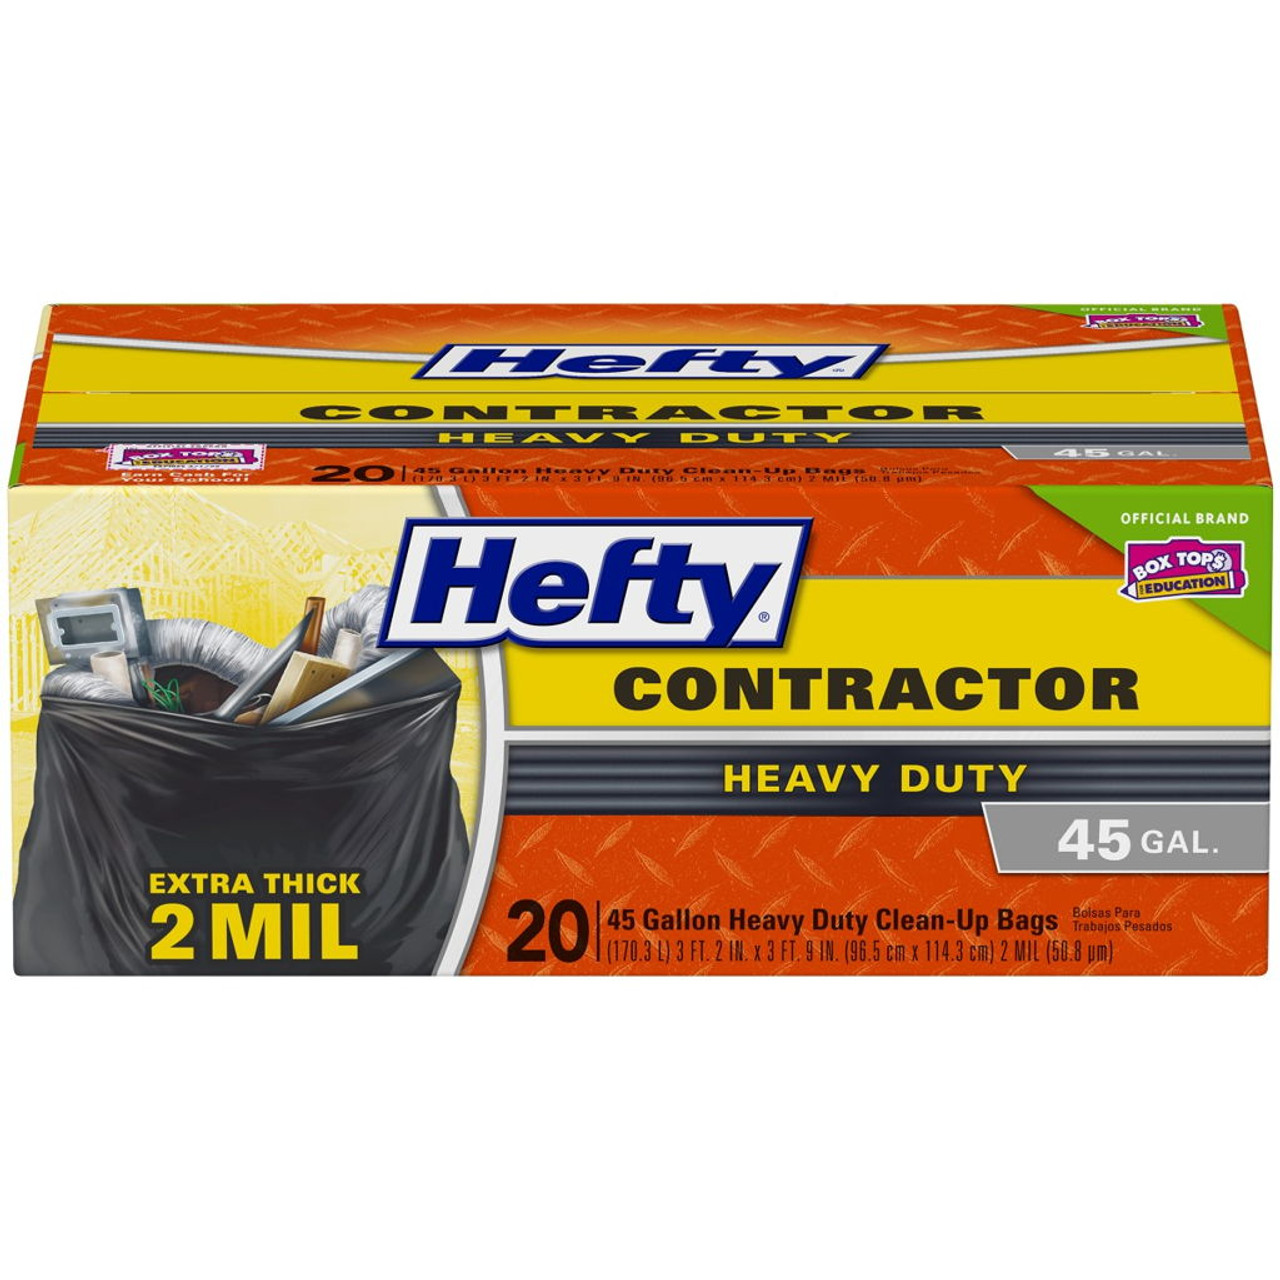 Heavy-Duty Contractor Bags [Pack of 20] - 42 Gallon Large Black Trash Bags  For Construction Sites, Yard Waste & Commercial Use- Industrial Strength